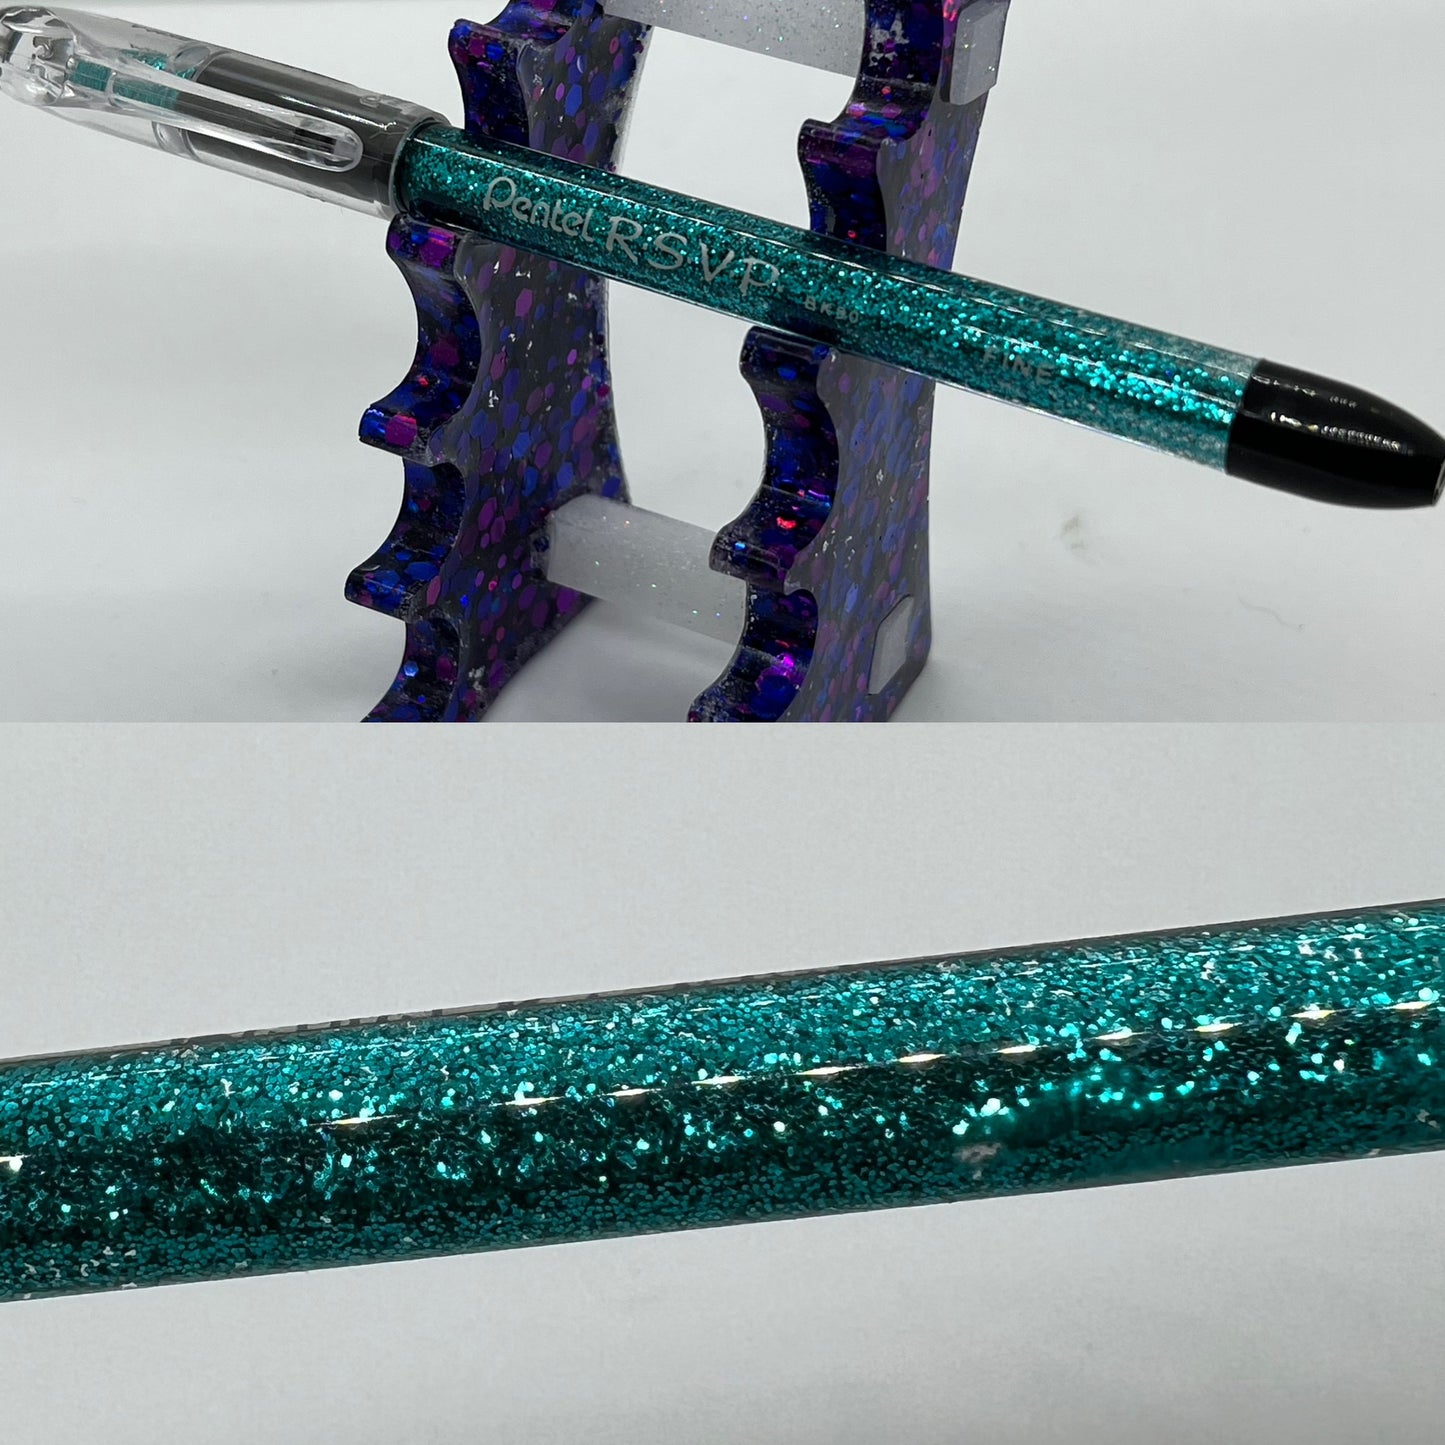 Glitter Infused Pens